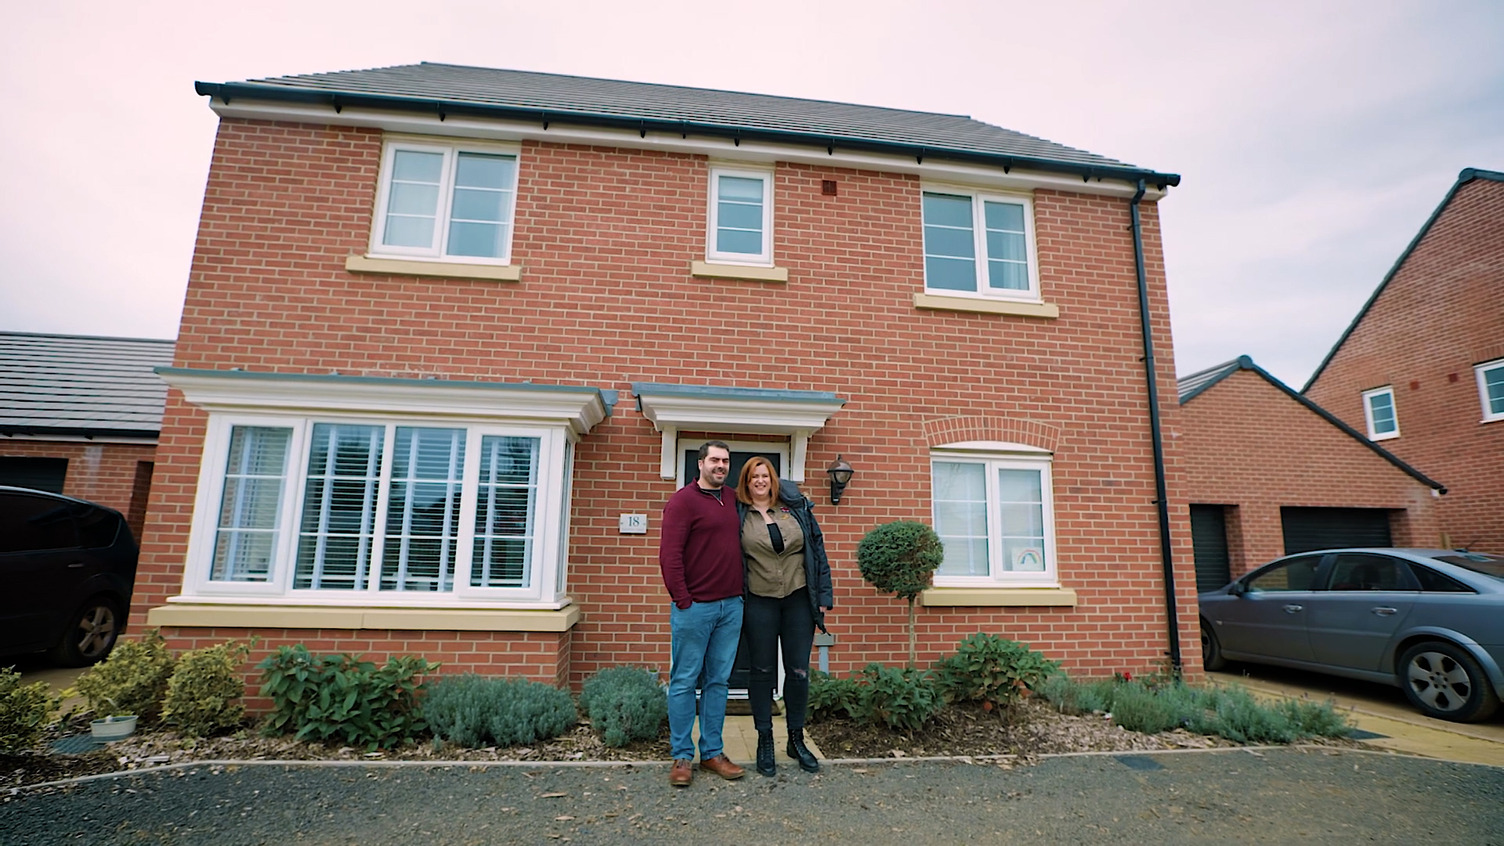 Family find their dream home with Linden Homes